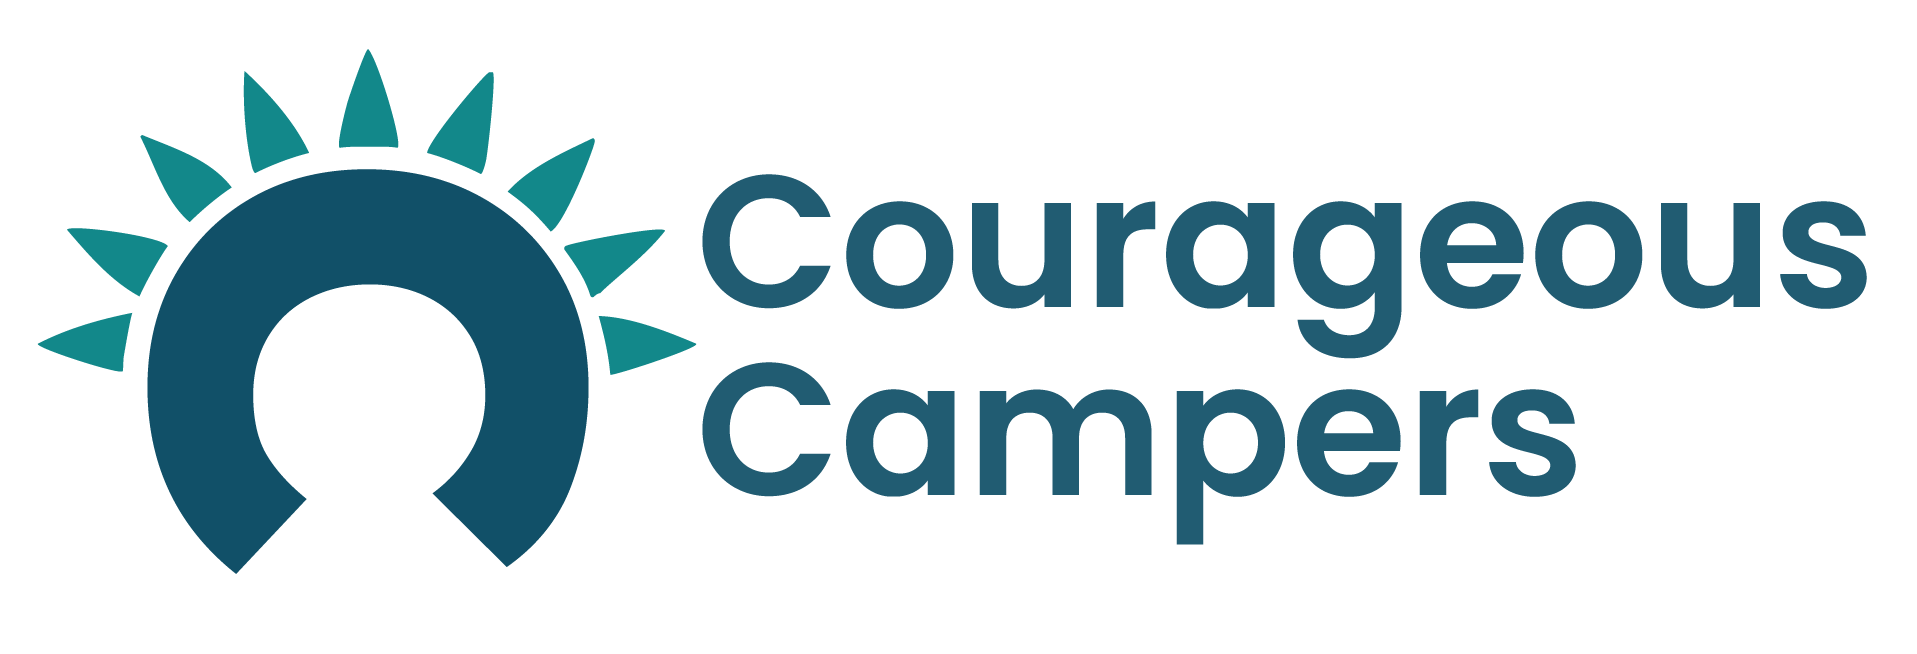 Introducing Courageous Campers!